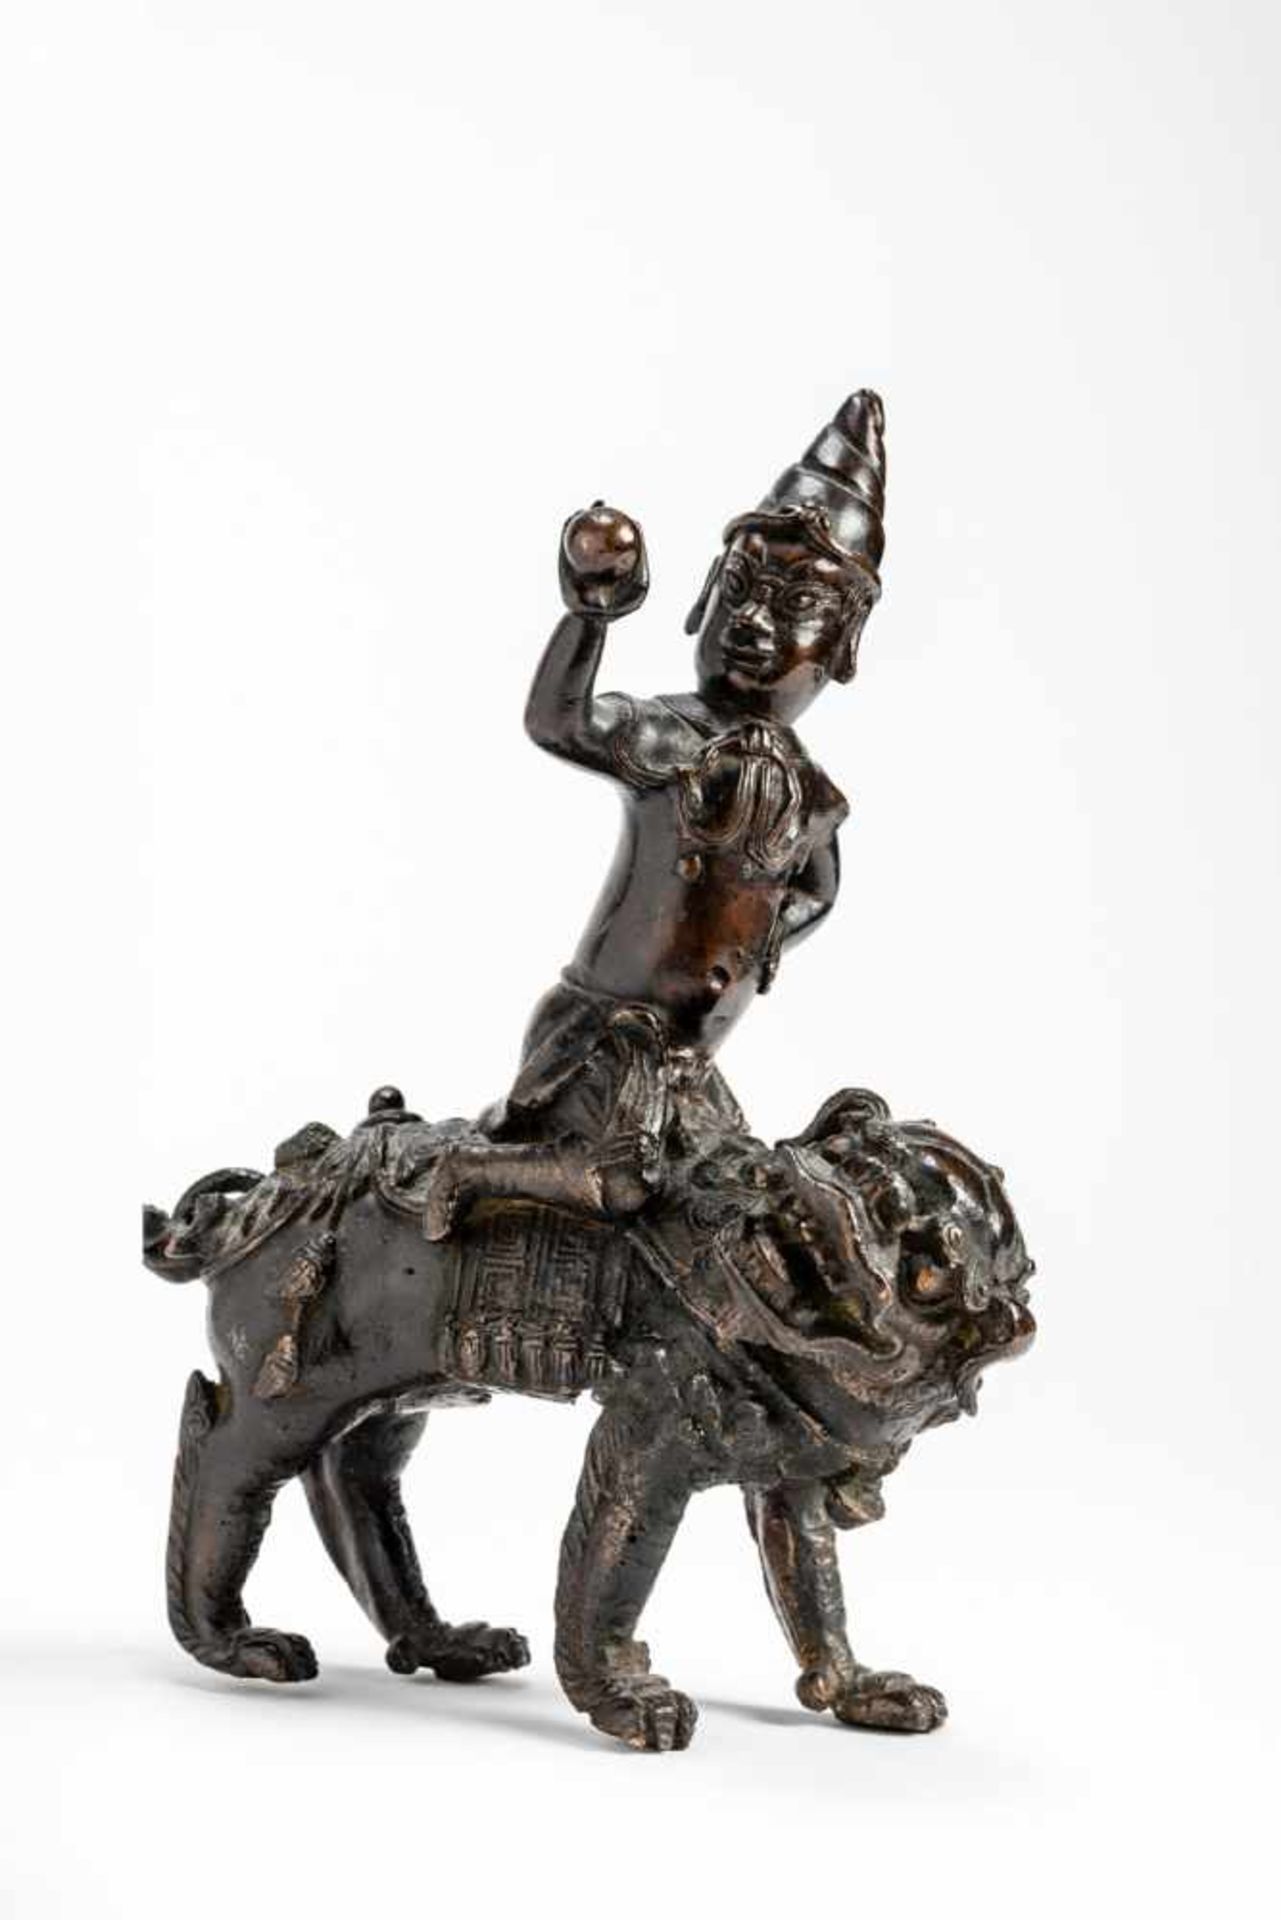 A BRONZE GUARDIAN DEITY RIDING ON A LION - Image 5 of 7